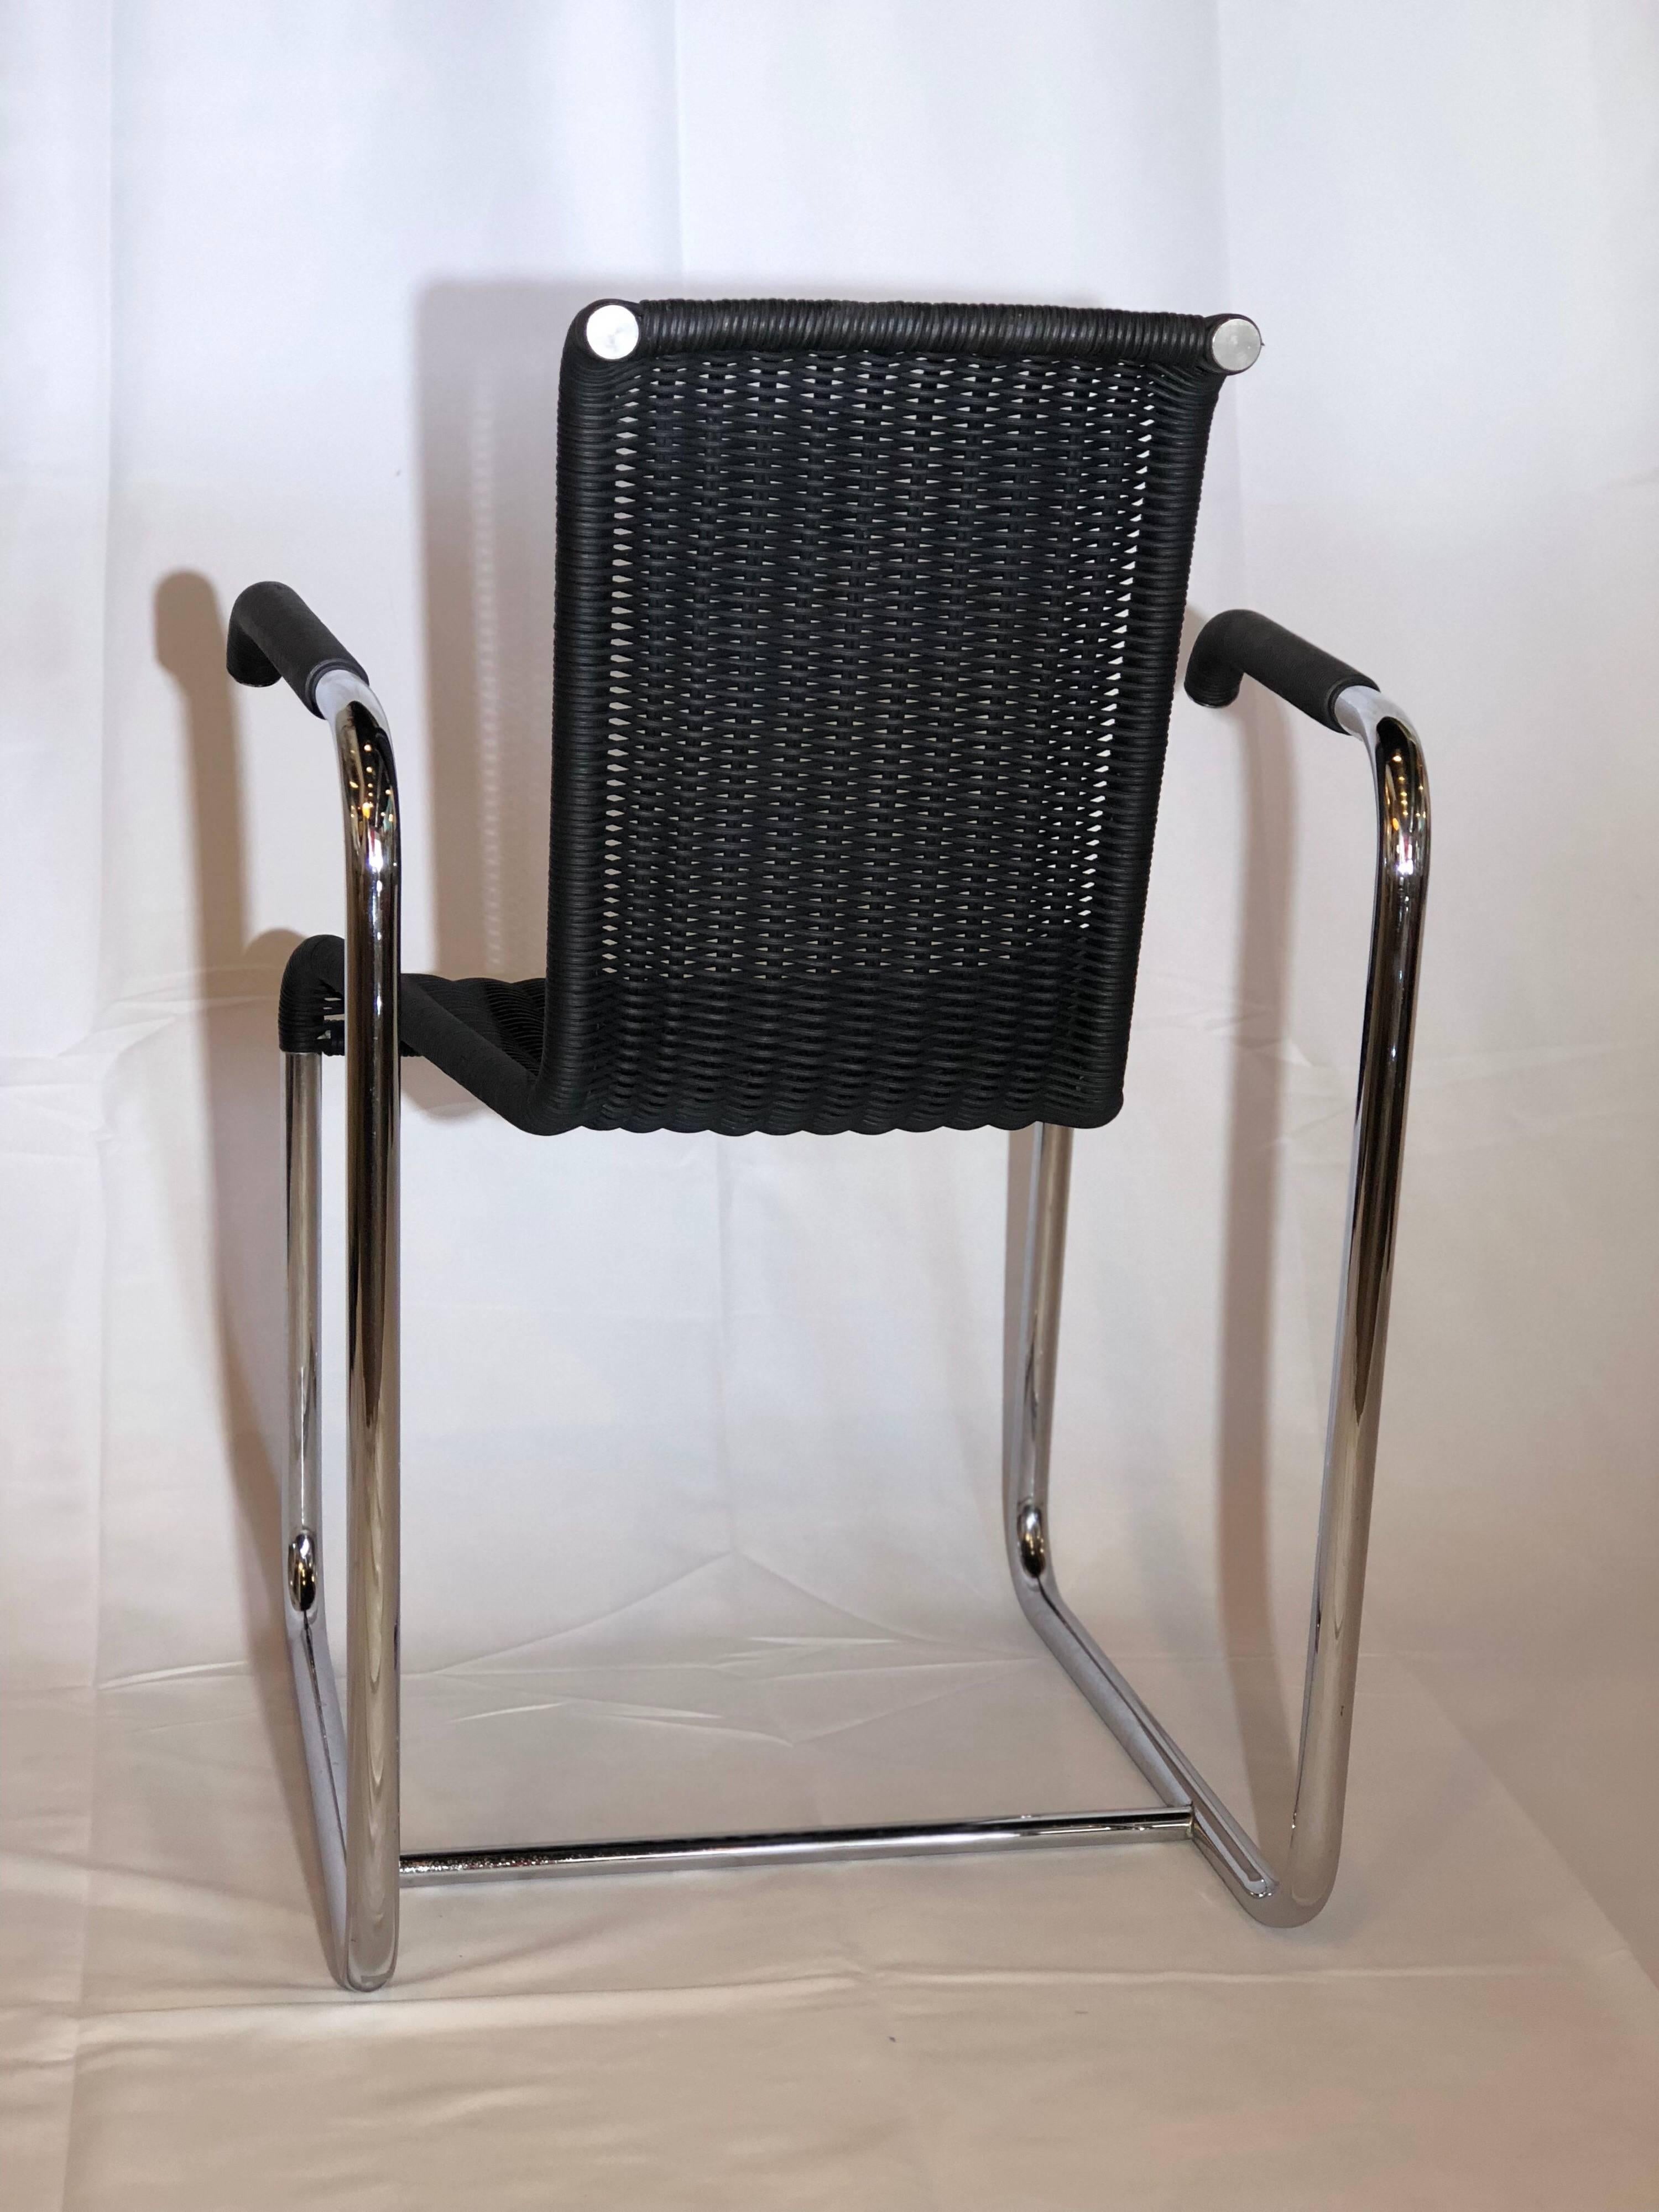 Jean Prouvé D20 Stainless Steel Leather Wicker Chairs for Tecta, Germany, 1980s For Sale 1